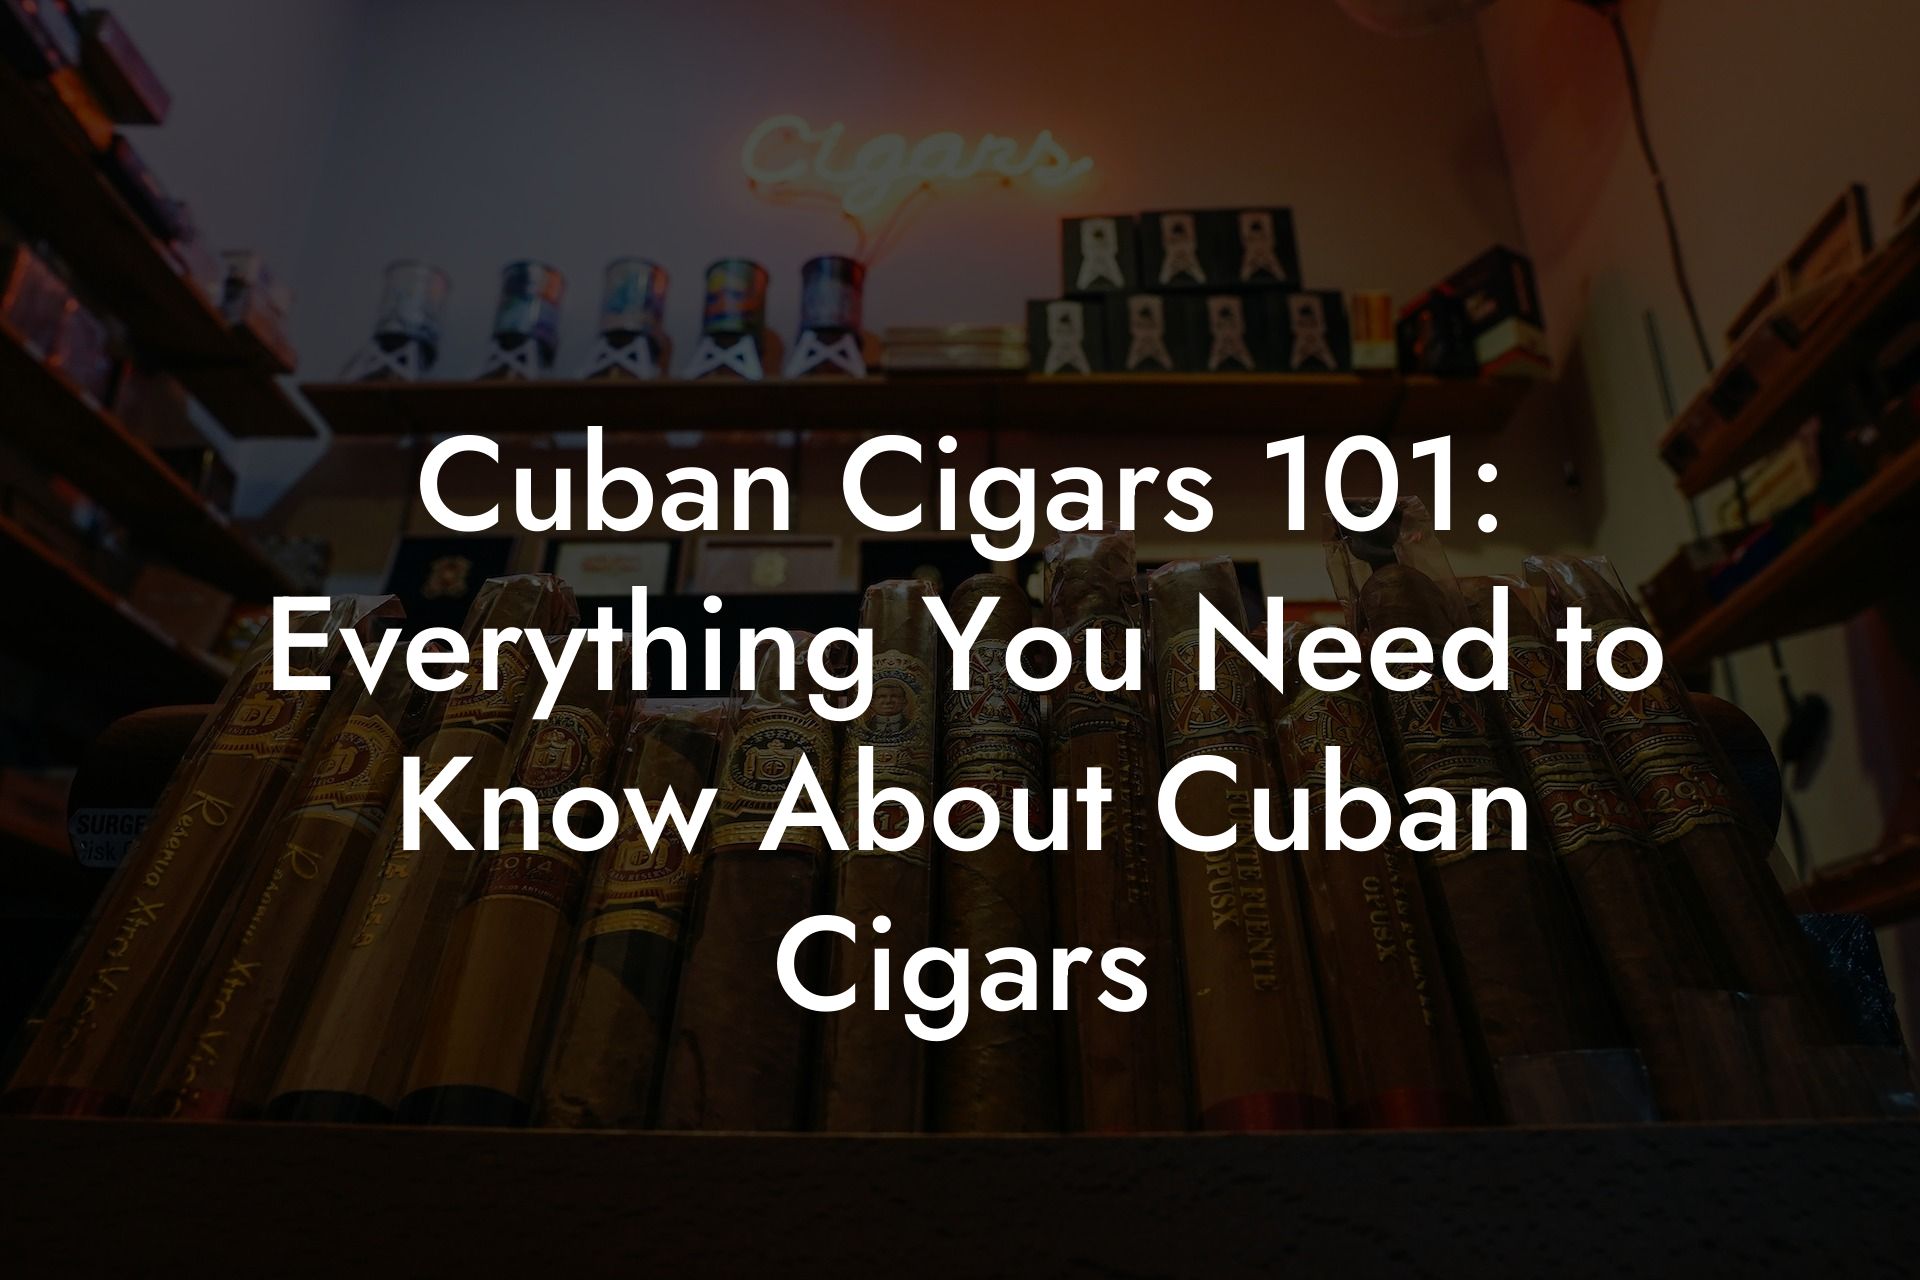 Cuban Cigars 101: Everything You Need to Know About Cuban Cigars